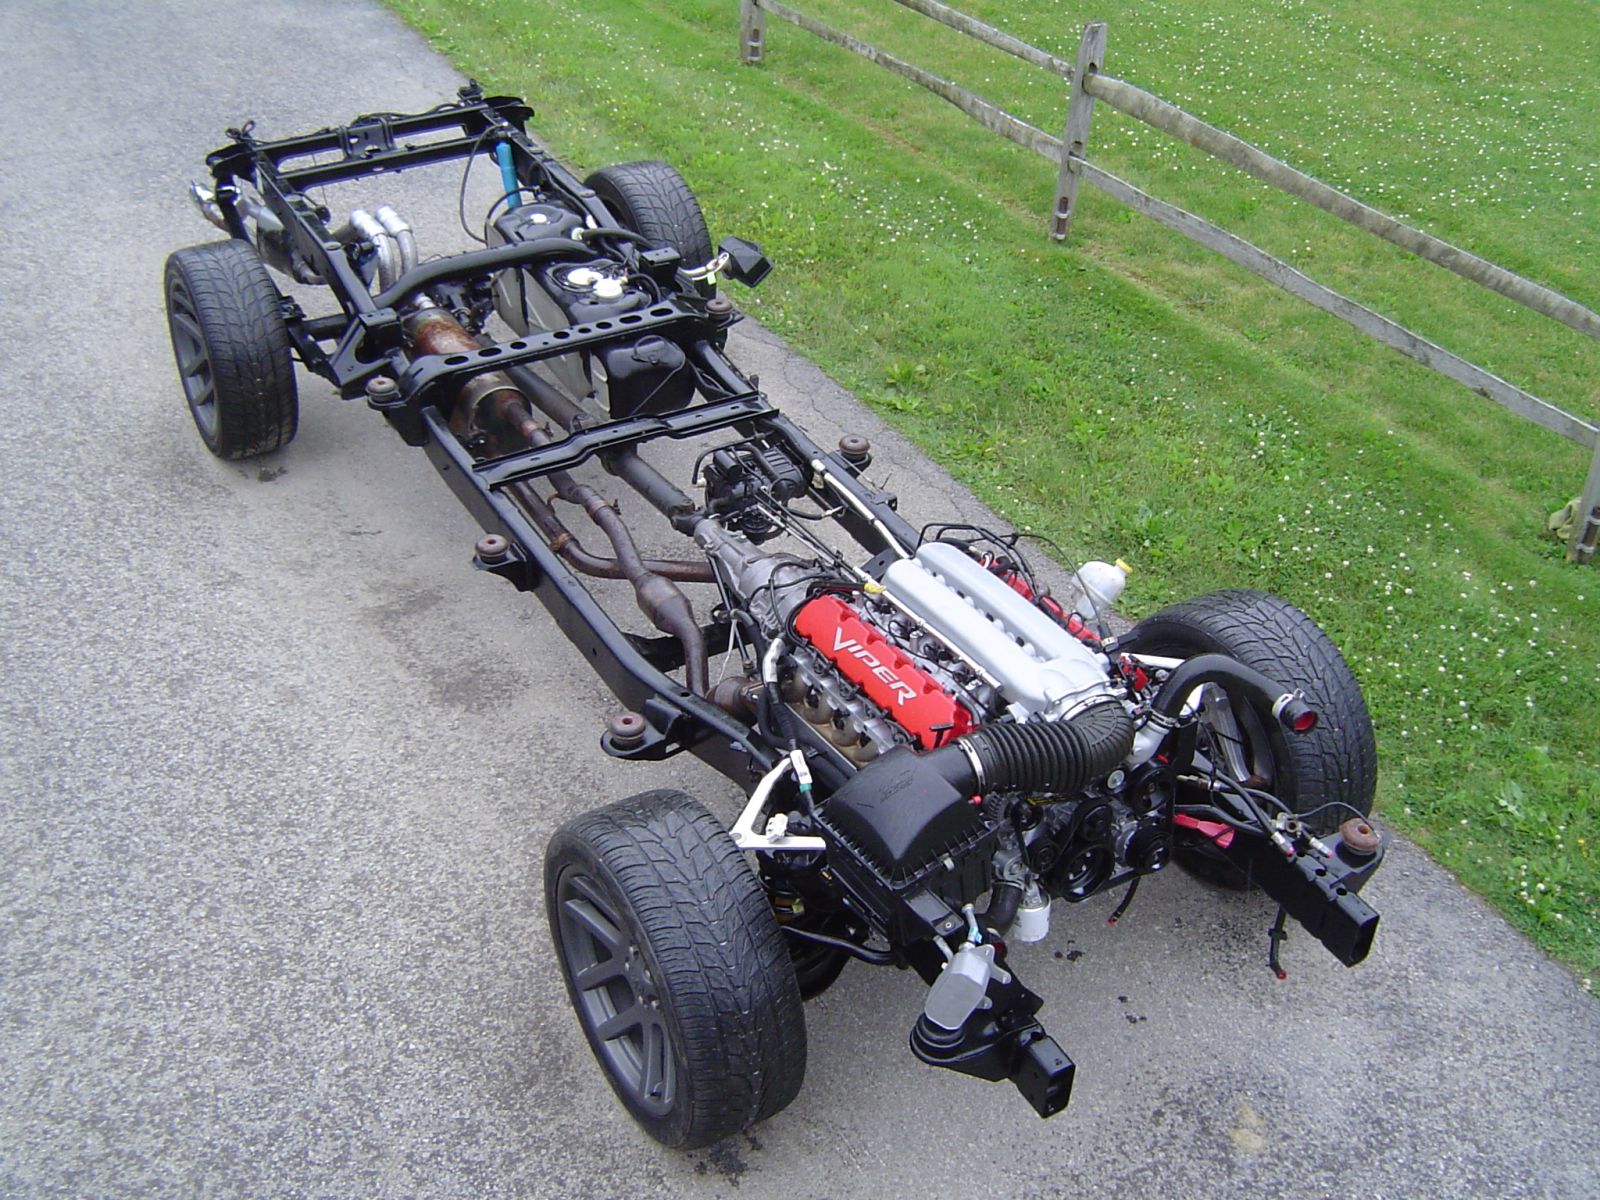 Panhead rolling chassis for sale.